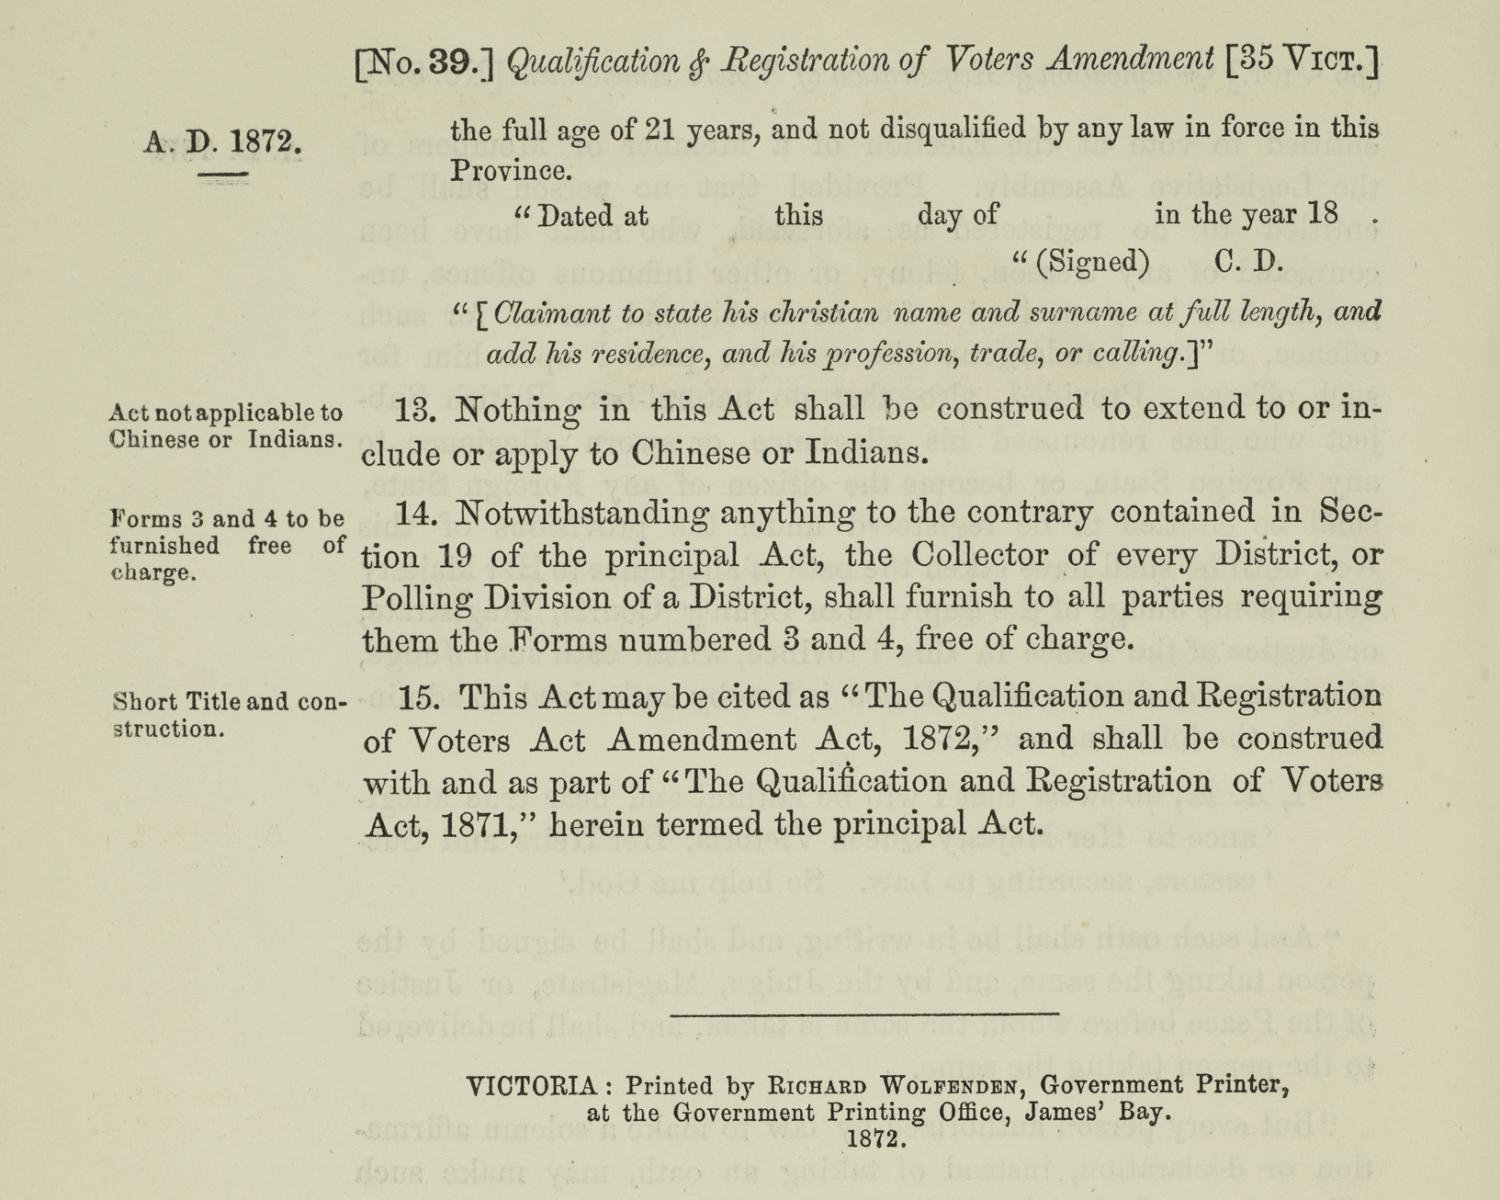 Provincial act that excluded Chinese and "Indian" people from voting.